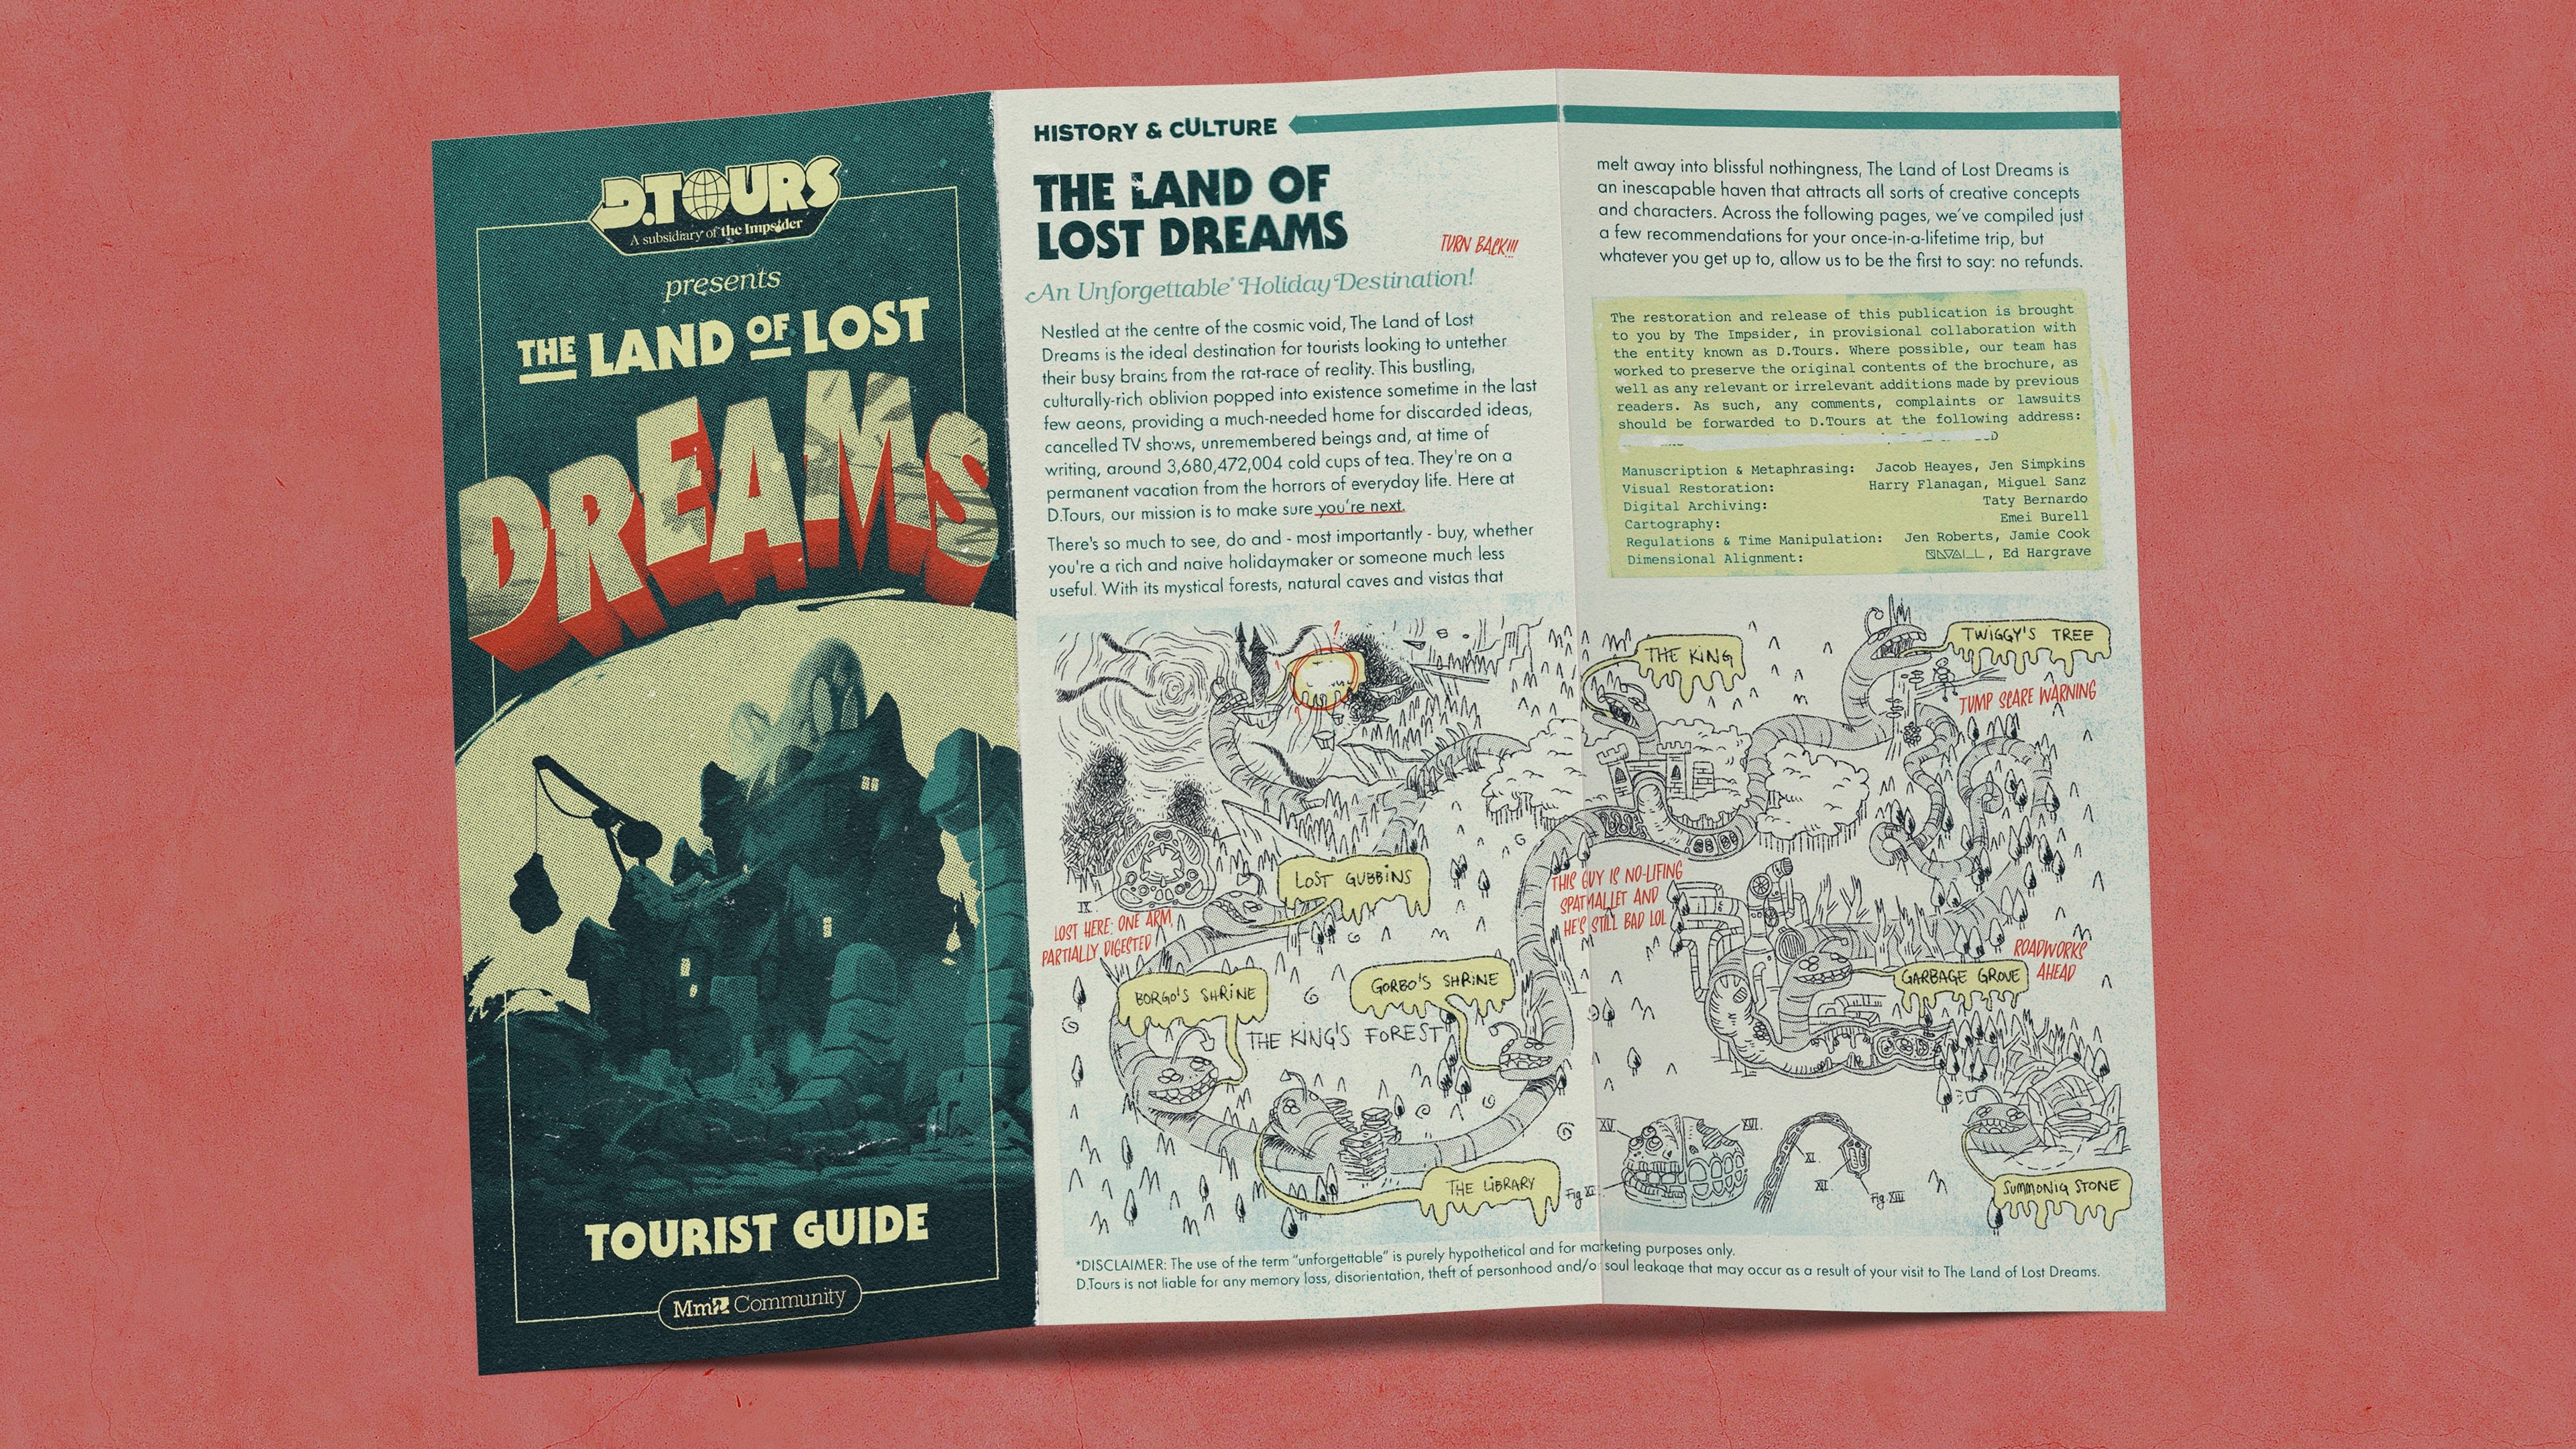 Another image of The Land of Lost Dreams D.Tours brochure that Jen worked on.